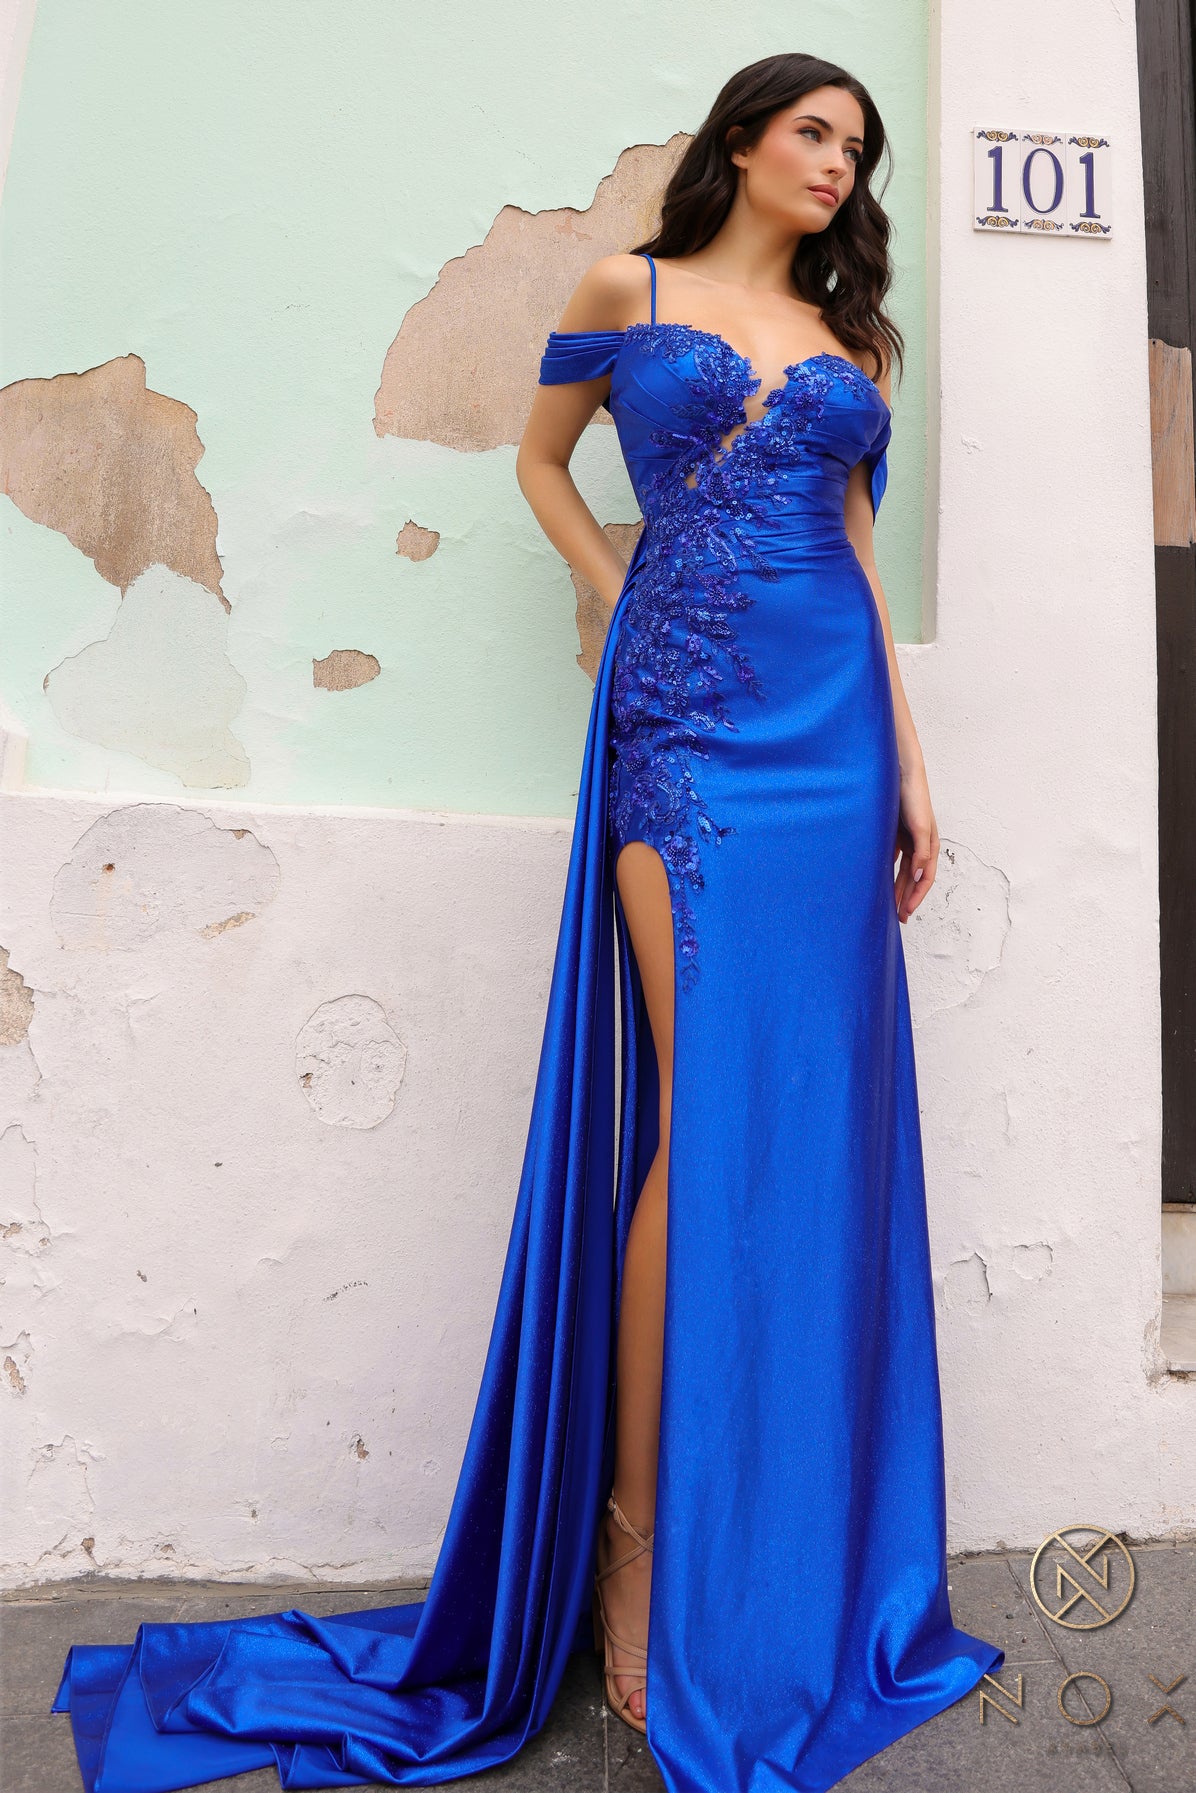 This Nox Anabel E1451 Prom Dress is a stunning choice for any formal occasion. The shimmering lace, off the shoulder design, and elegant overskirt create a beautiful and sophisticated look. With a slit detail and comfortable fit, this dress is perfect for standing out and dancing the night away.